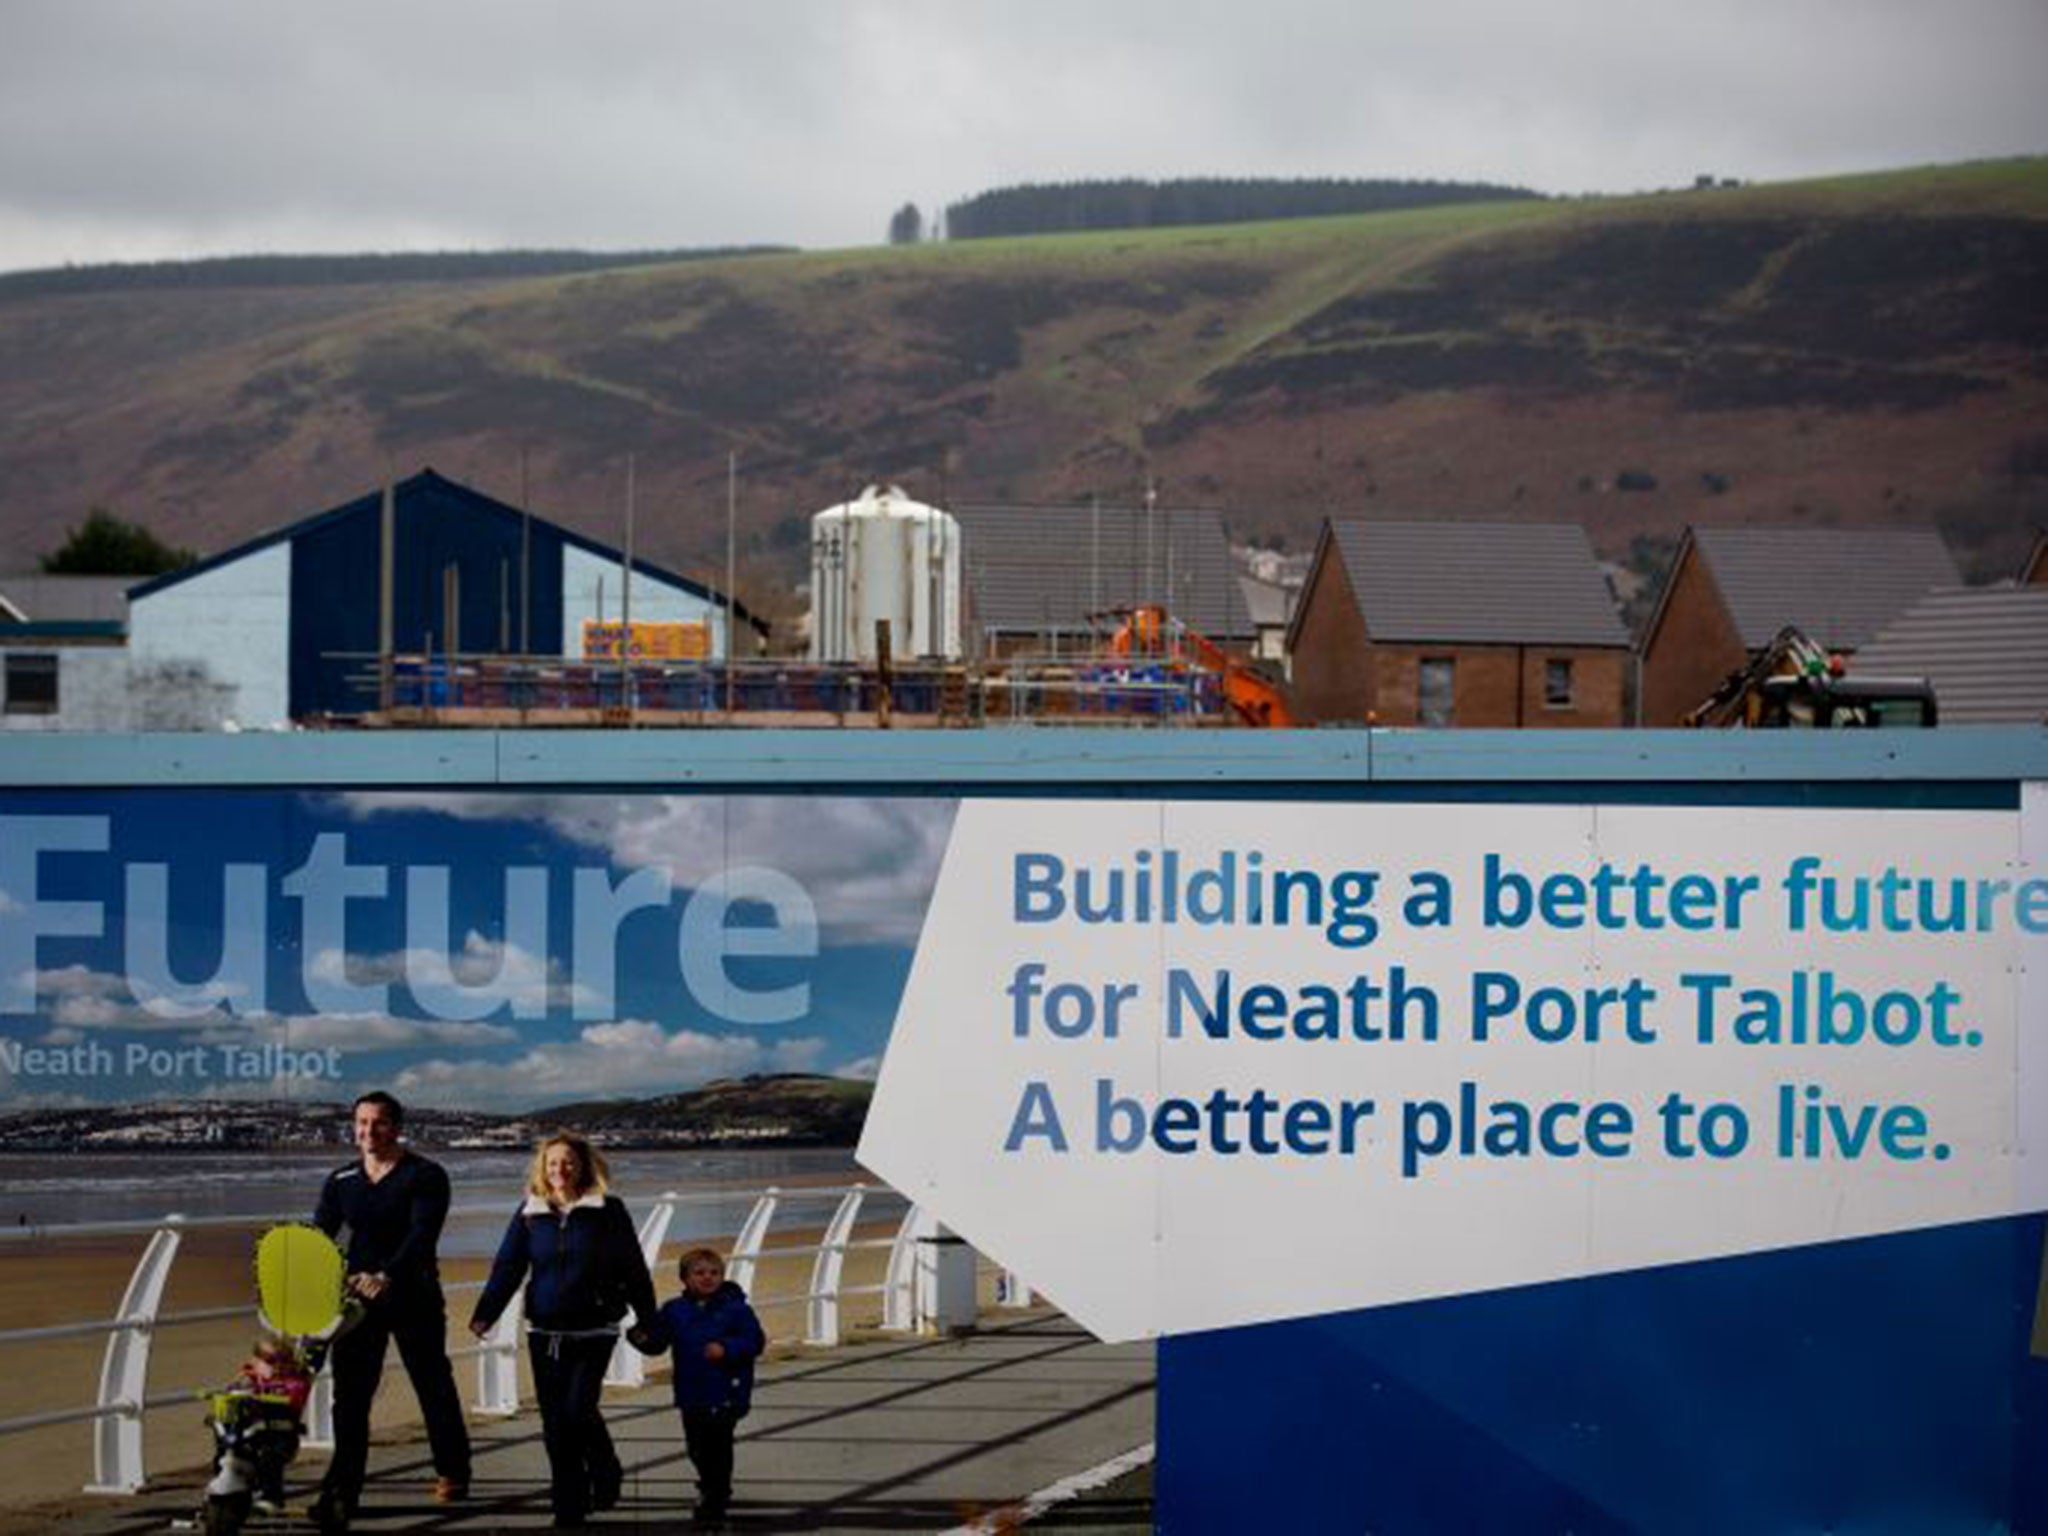 The loss of jobs at the Tata plant in Port Talbot is being blamed on high energy costs, business rates and cheap Chinese imports